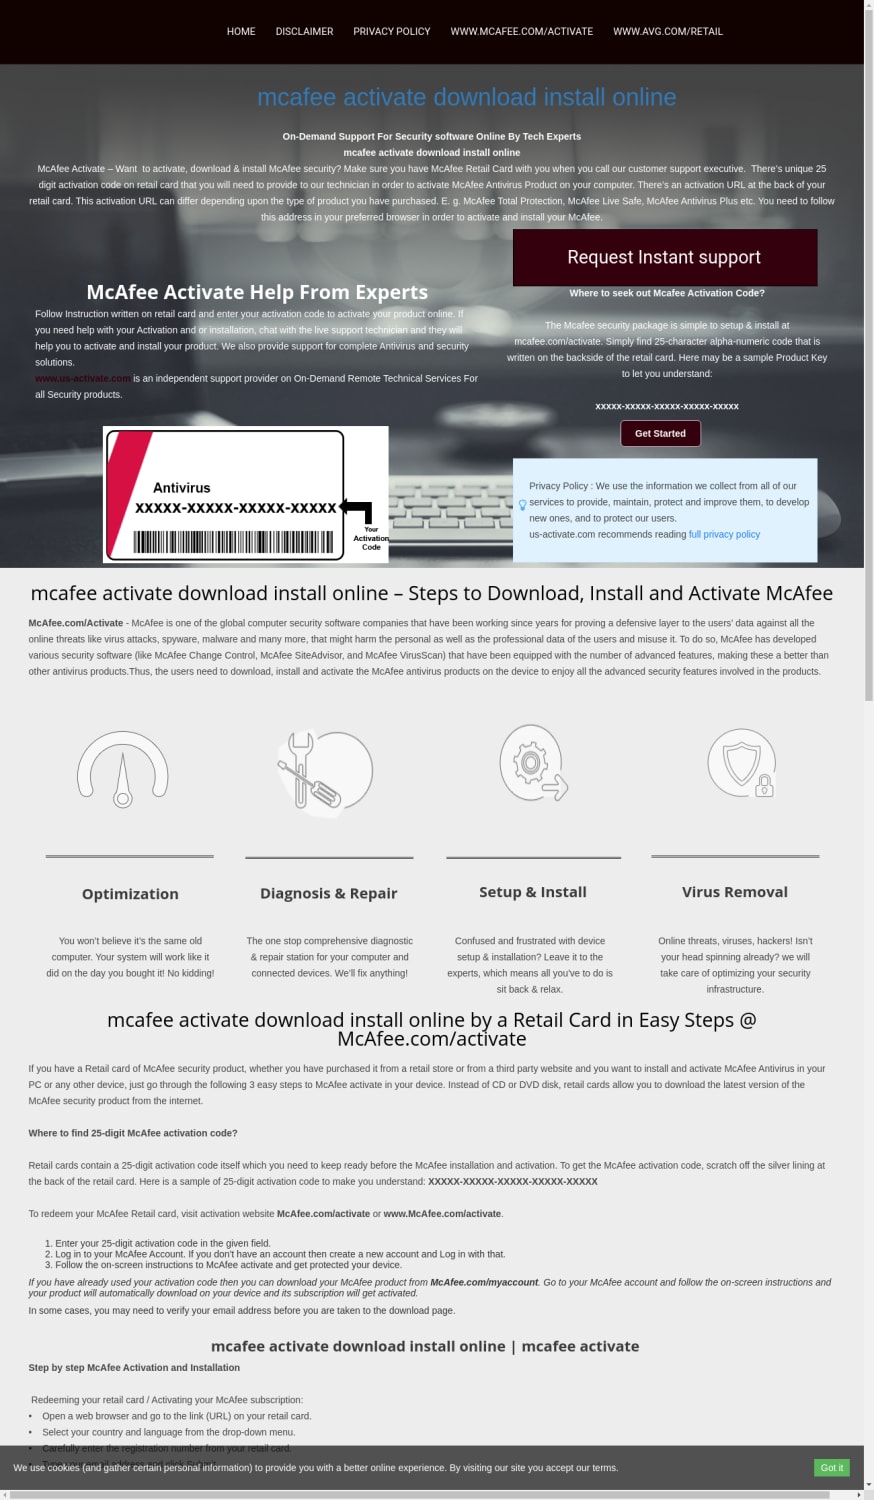 McAfee activate download install online at McAfee Activate website